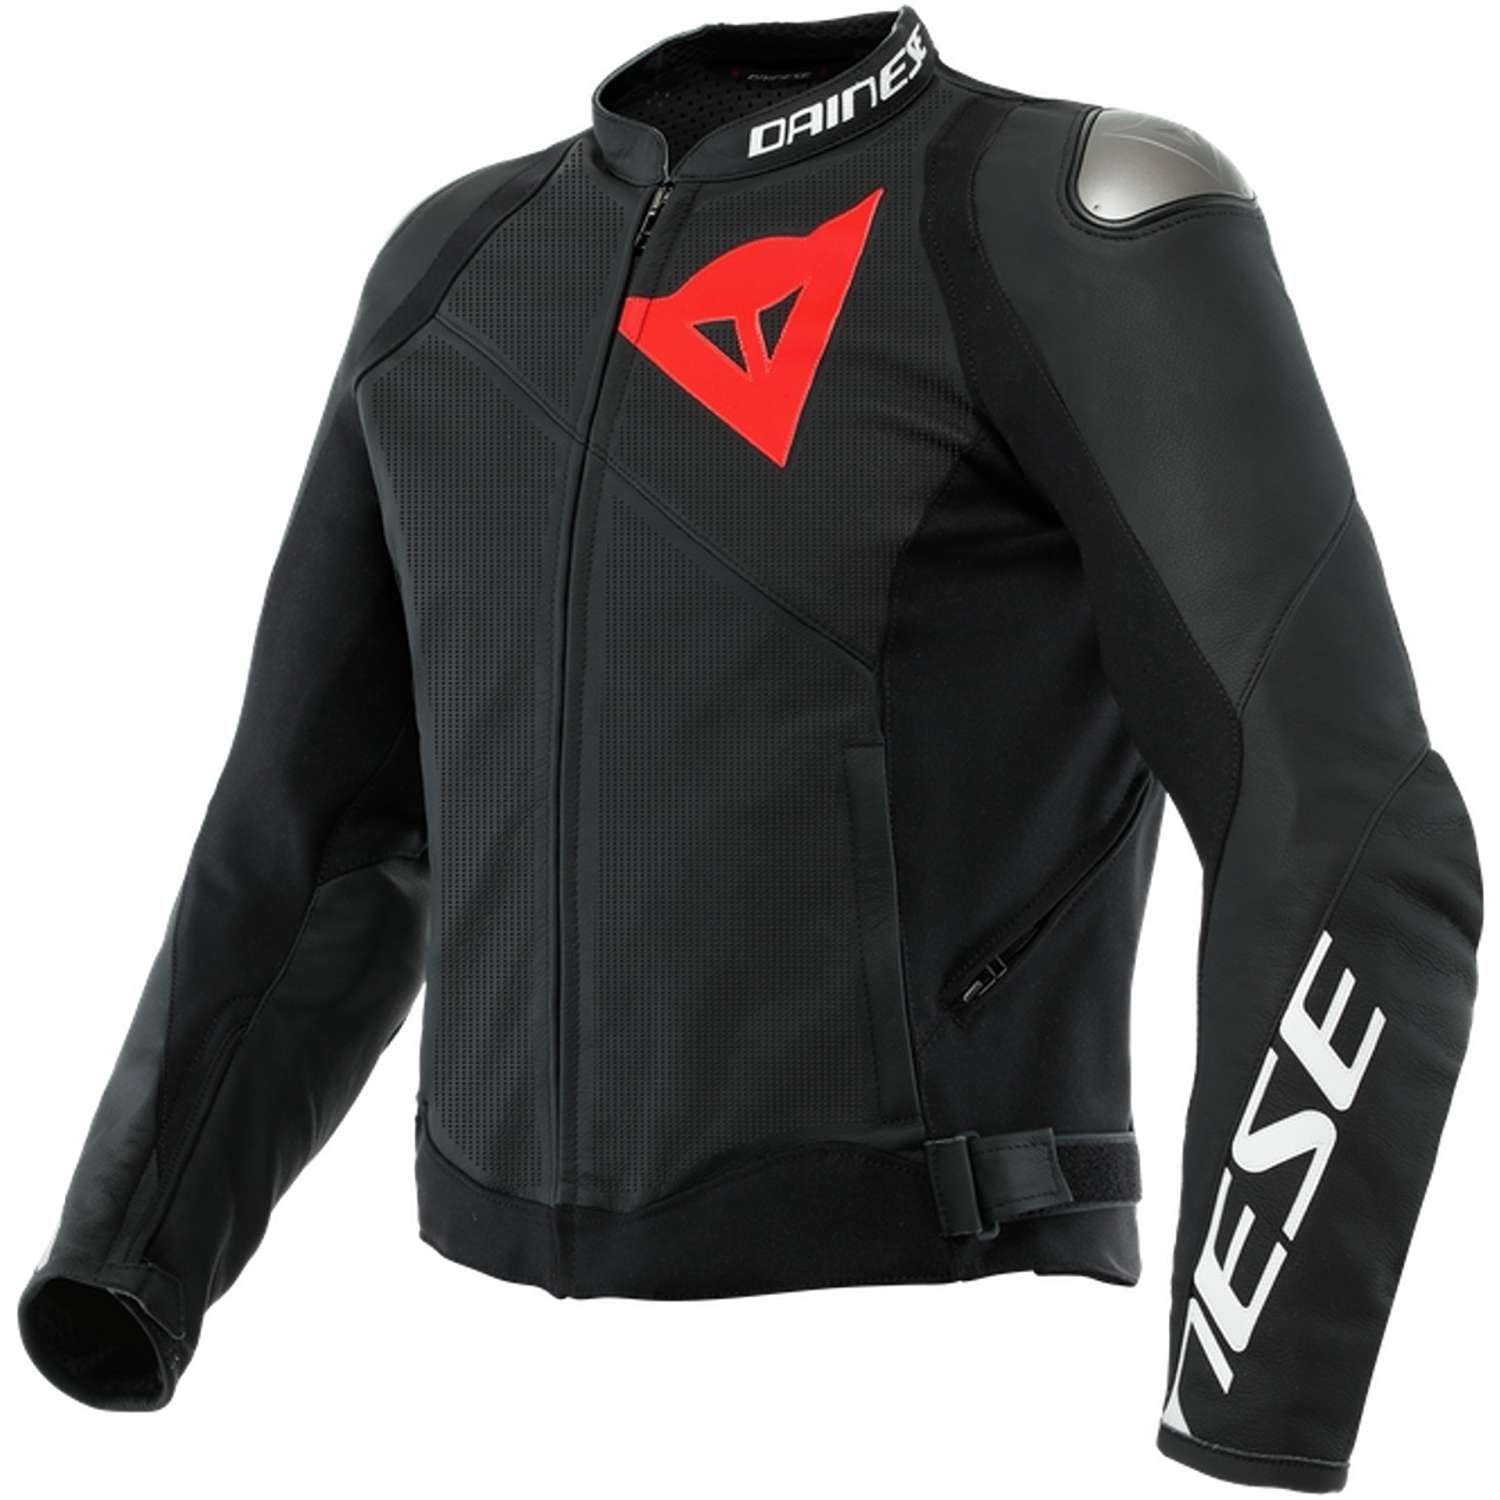 Image of Dainese Sportiva Leather Jacket Perf Black Matt Black Matt Black Matt Size 56 ID 8051019417800